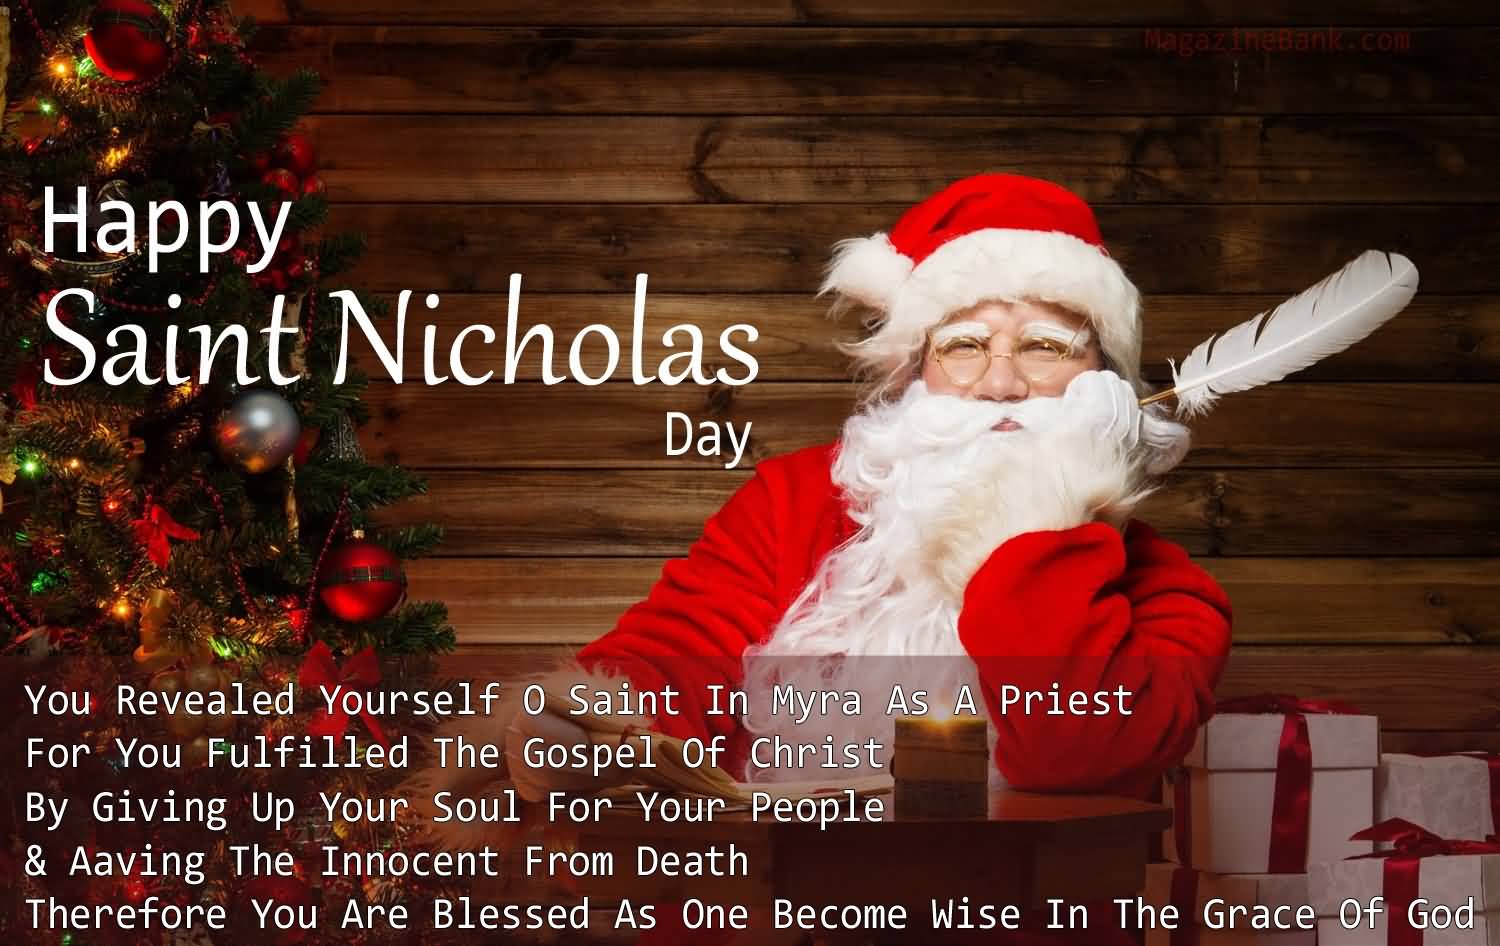 Happy Saint Nicholas Day You Revealed Yourself O Saint In Myra As Priest For You Fulfilled The Gospel Of Christ